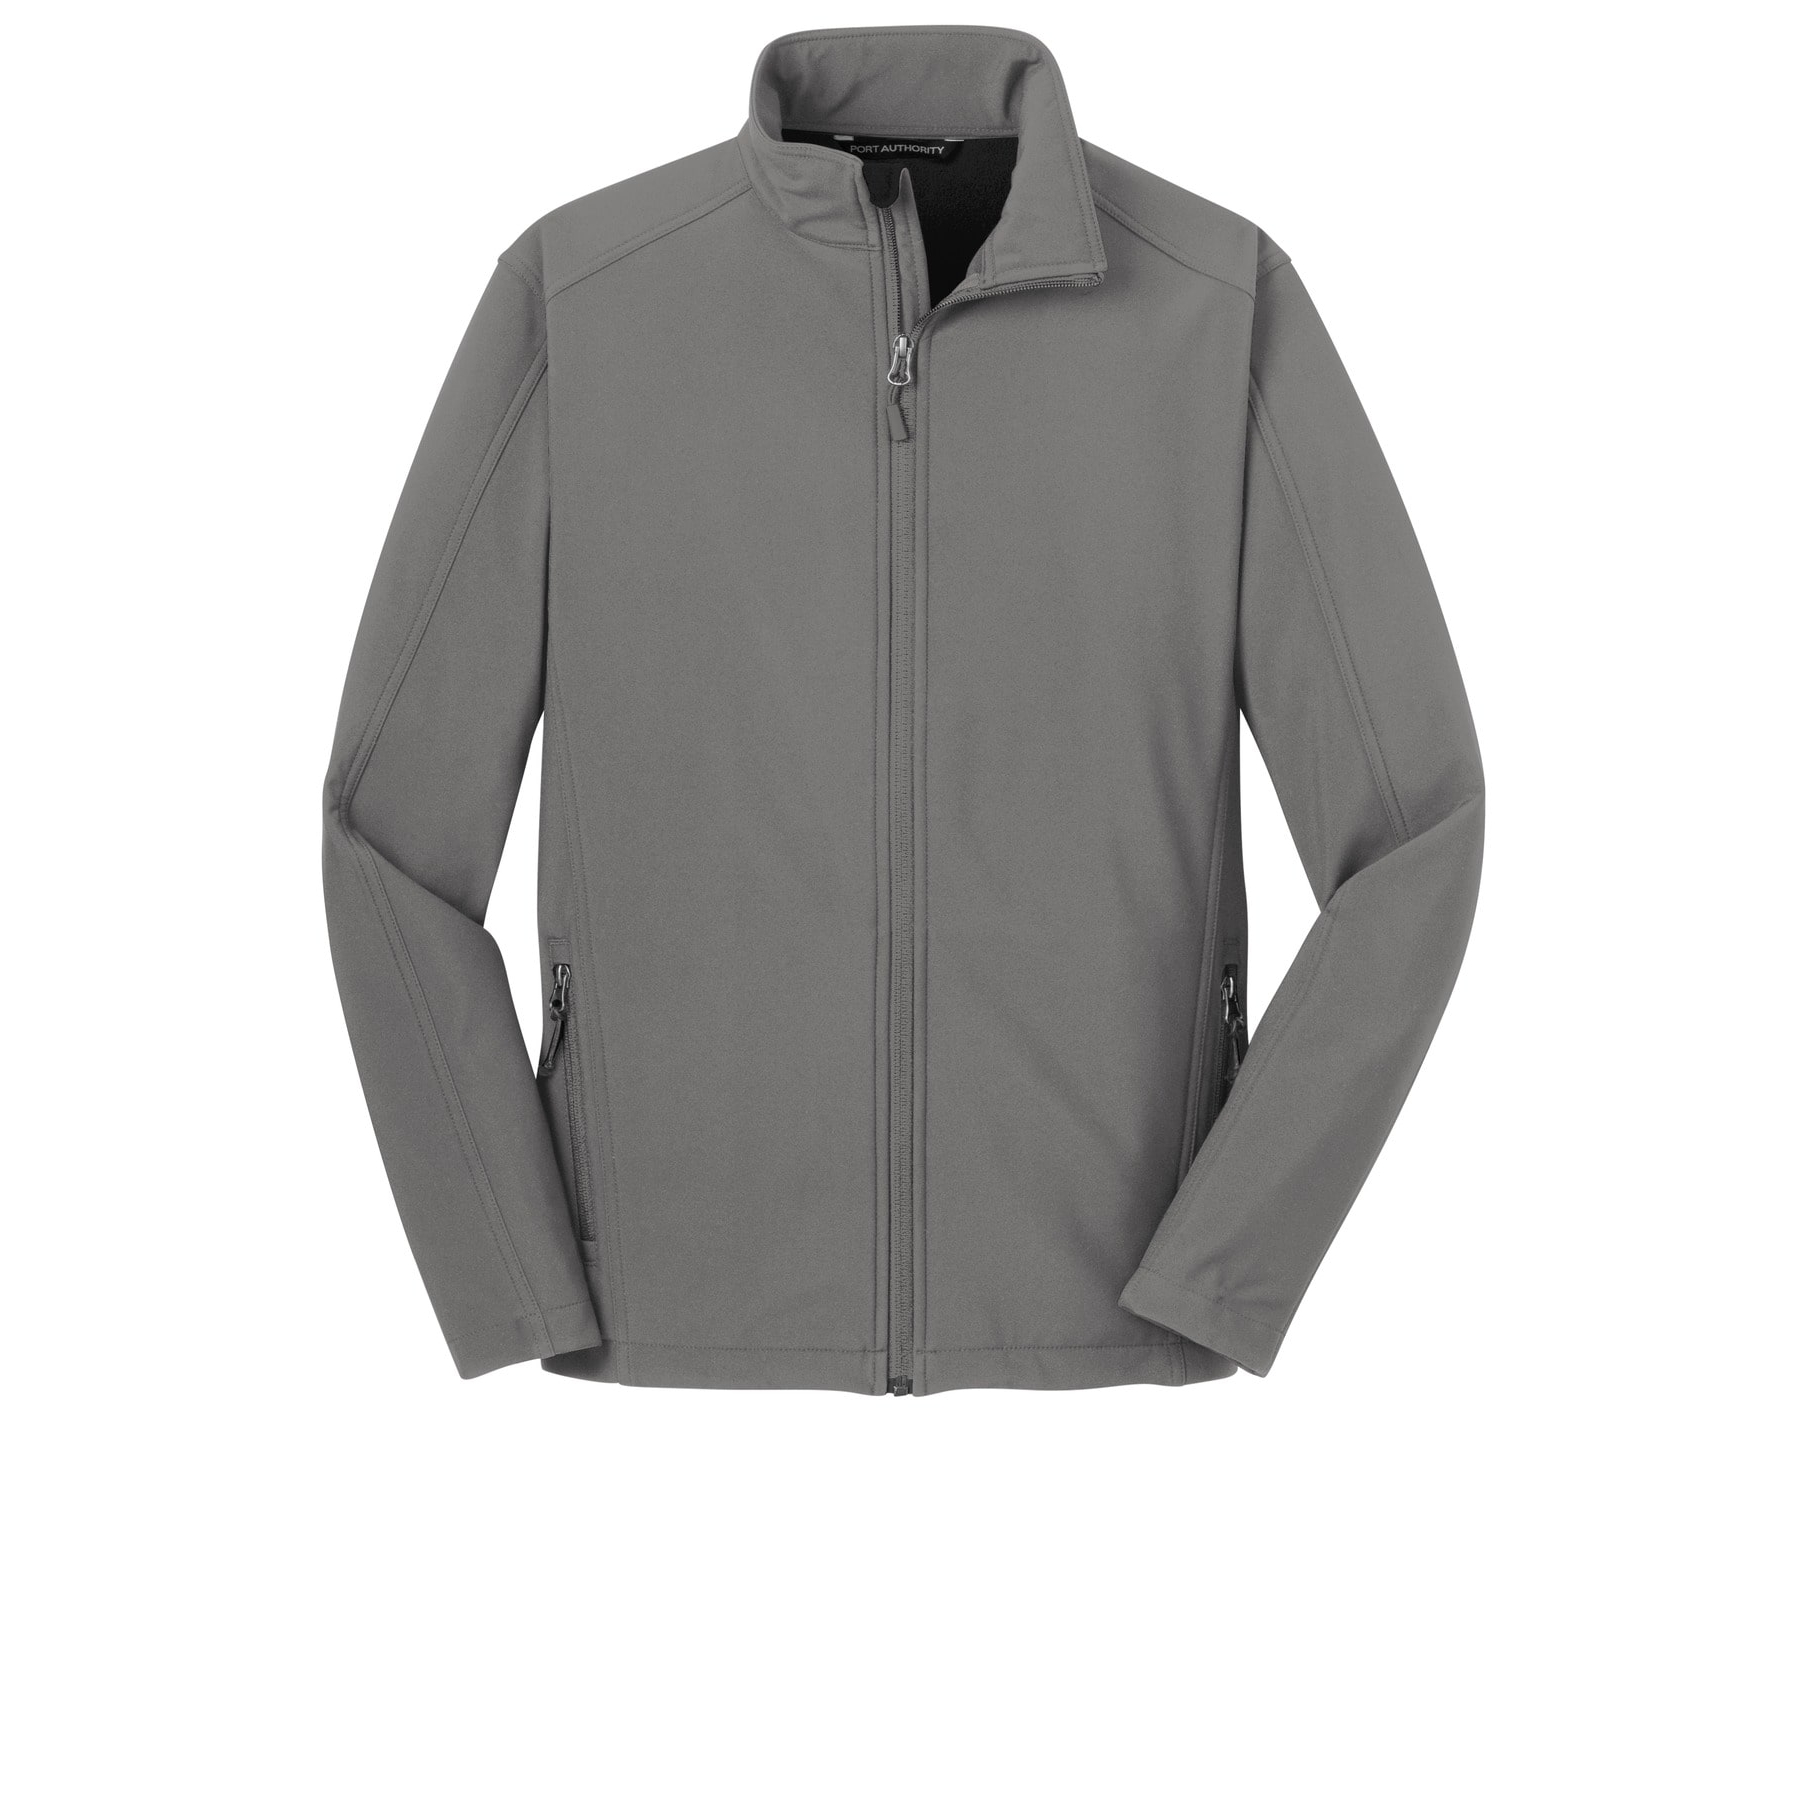 Shop Port Authority J317 Soft Shell Jacket at Wholesale Prices